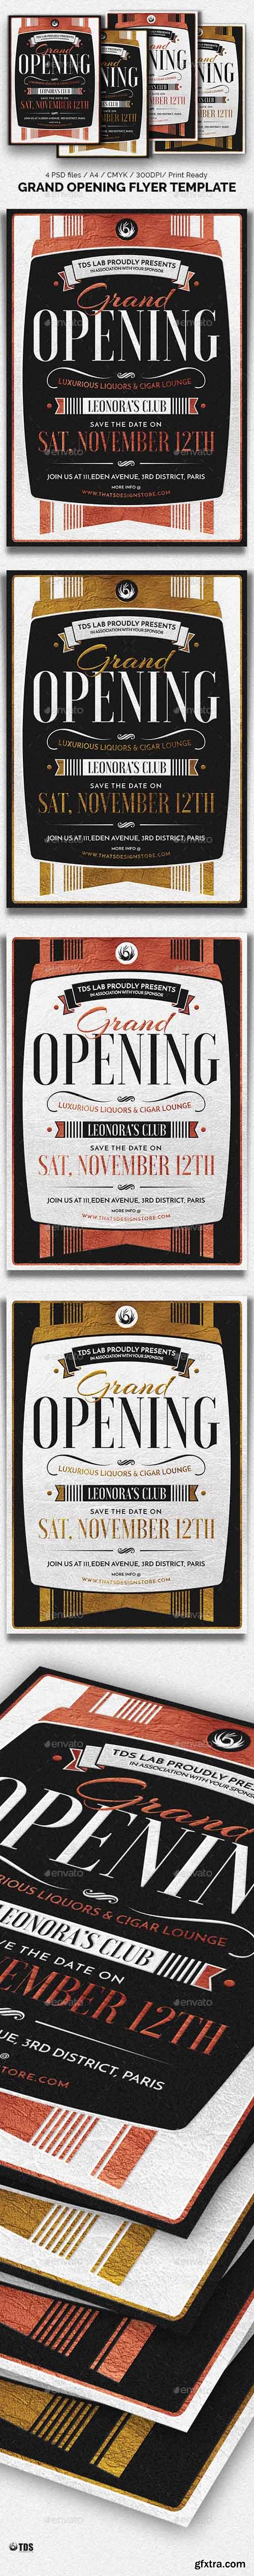 GR - Grand Opening Flyer Template 20145664